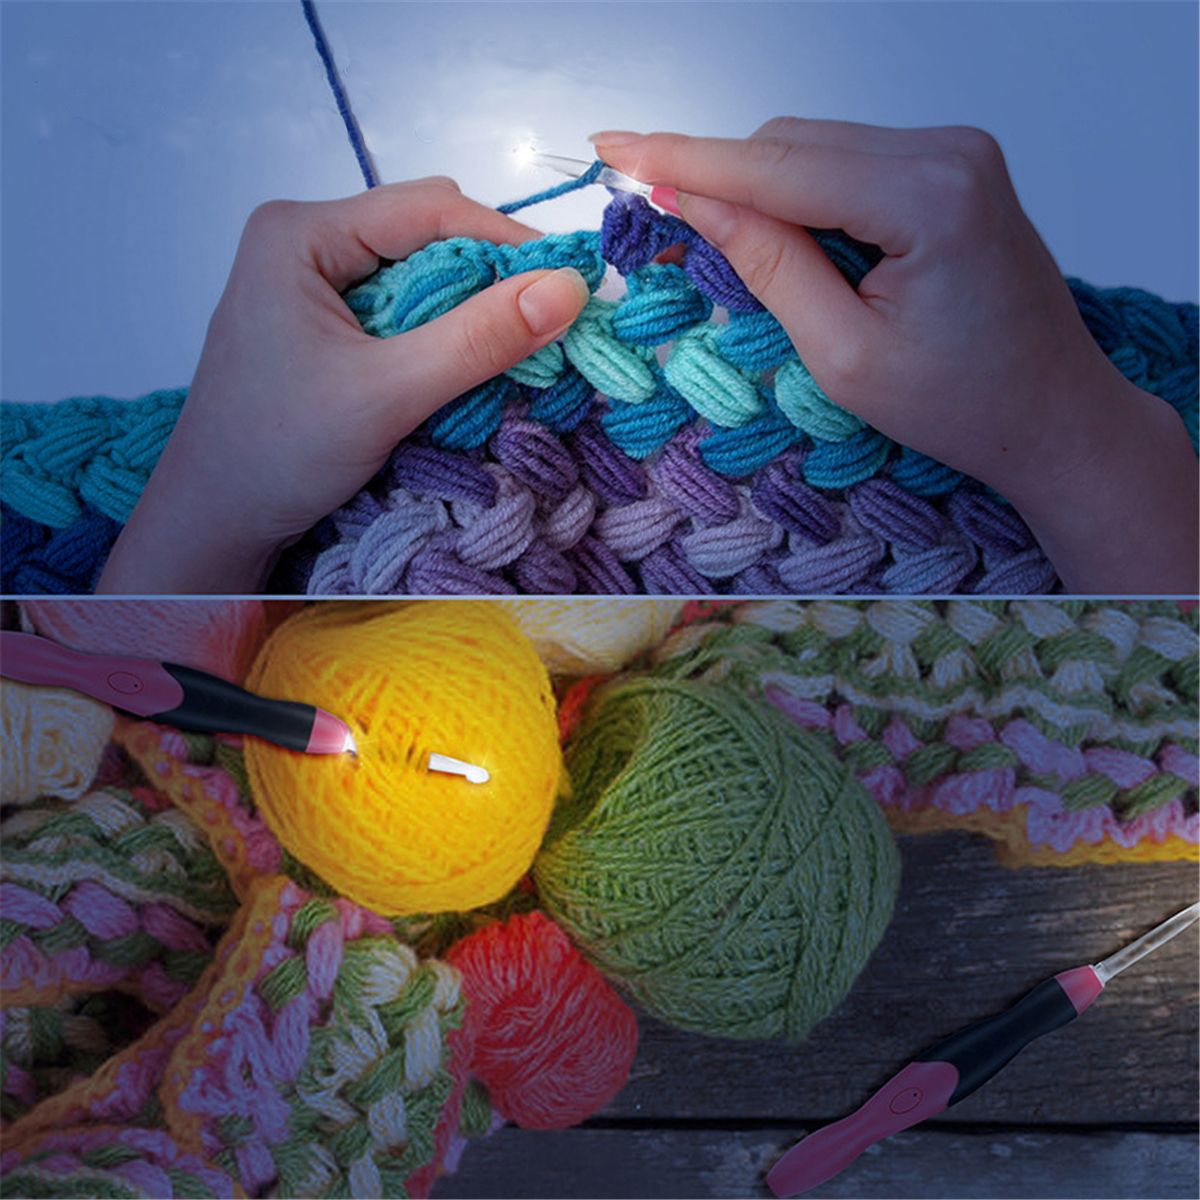 11-In-1-USB-LED-Light-Knitted-Crochet-Kit-DIY-Weaving-Tool-Kits-Sweater-Sewing-Accessories-DIY-LED-F-1586130